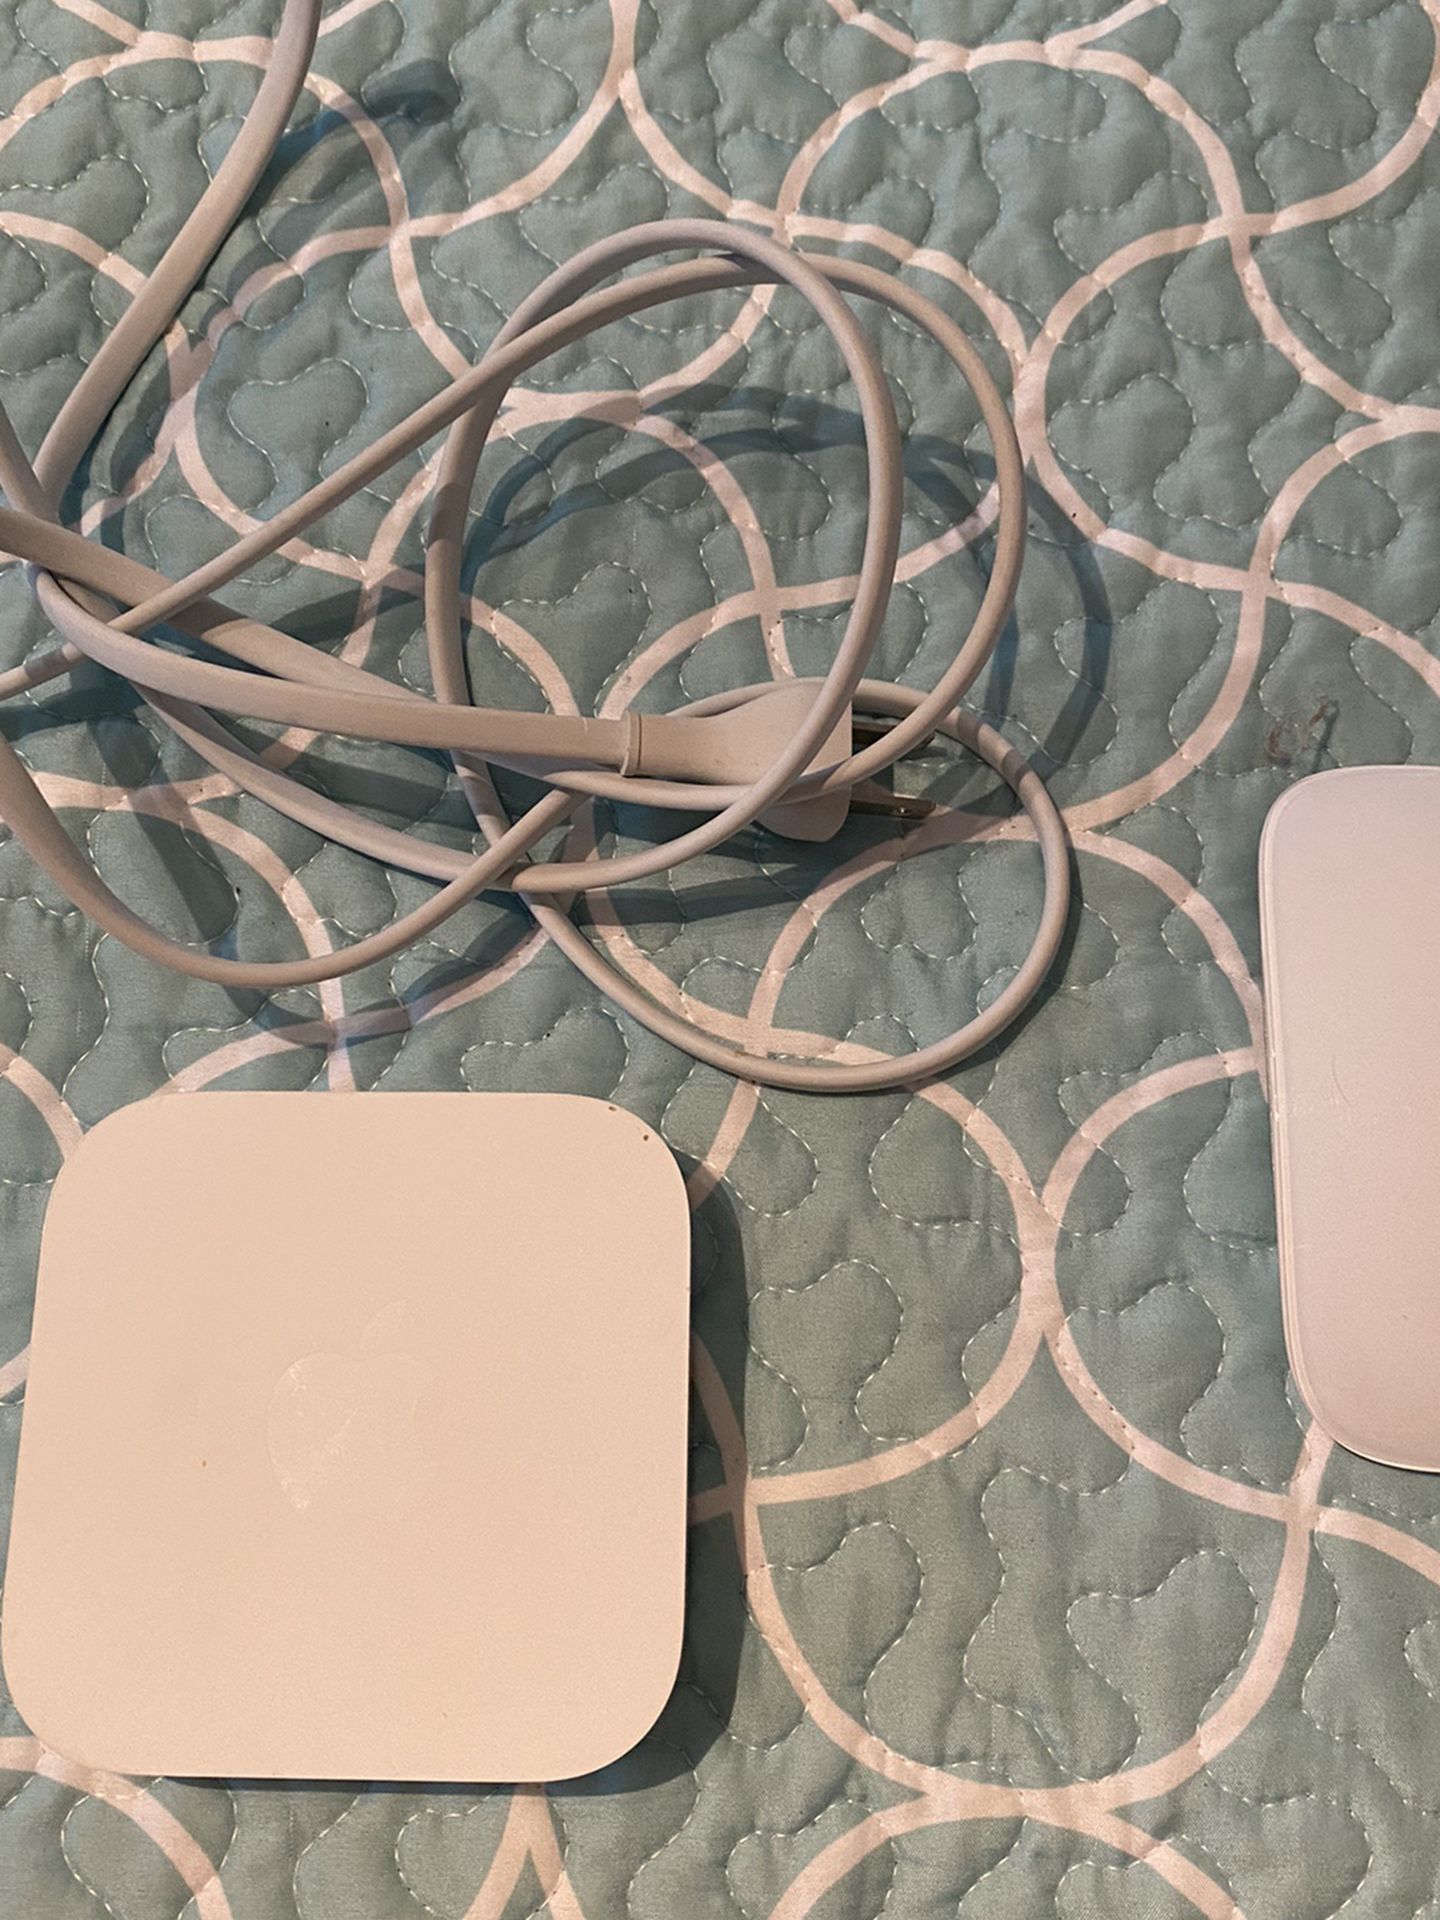 Apple Airport Express & Wireless Mouse - $50